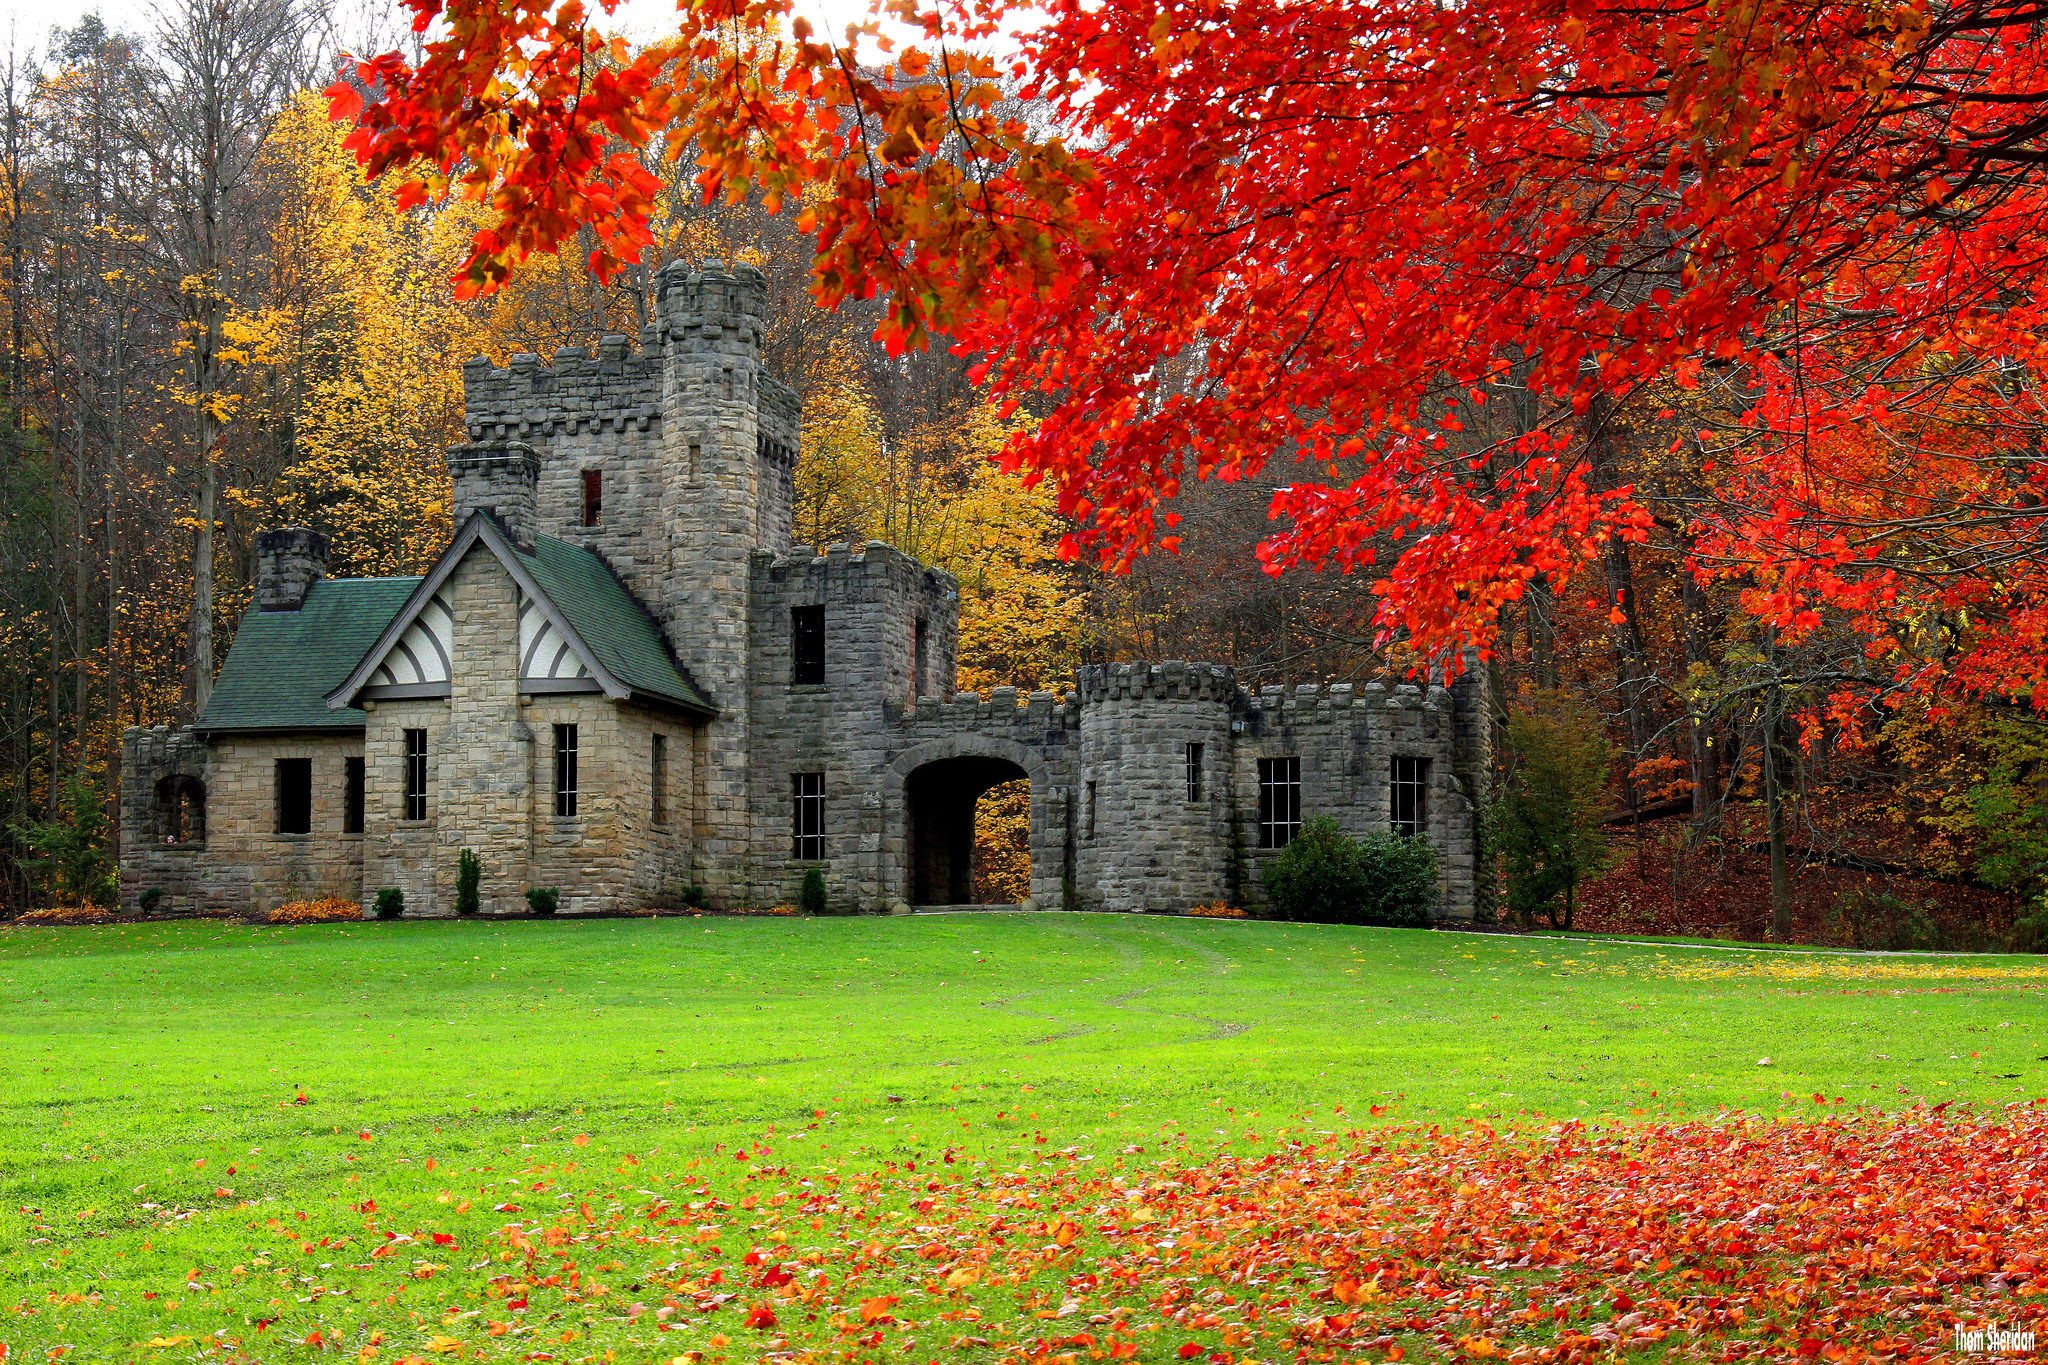 Castle in Autumn by Thom Sheridan